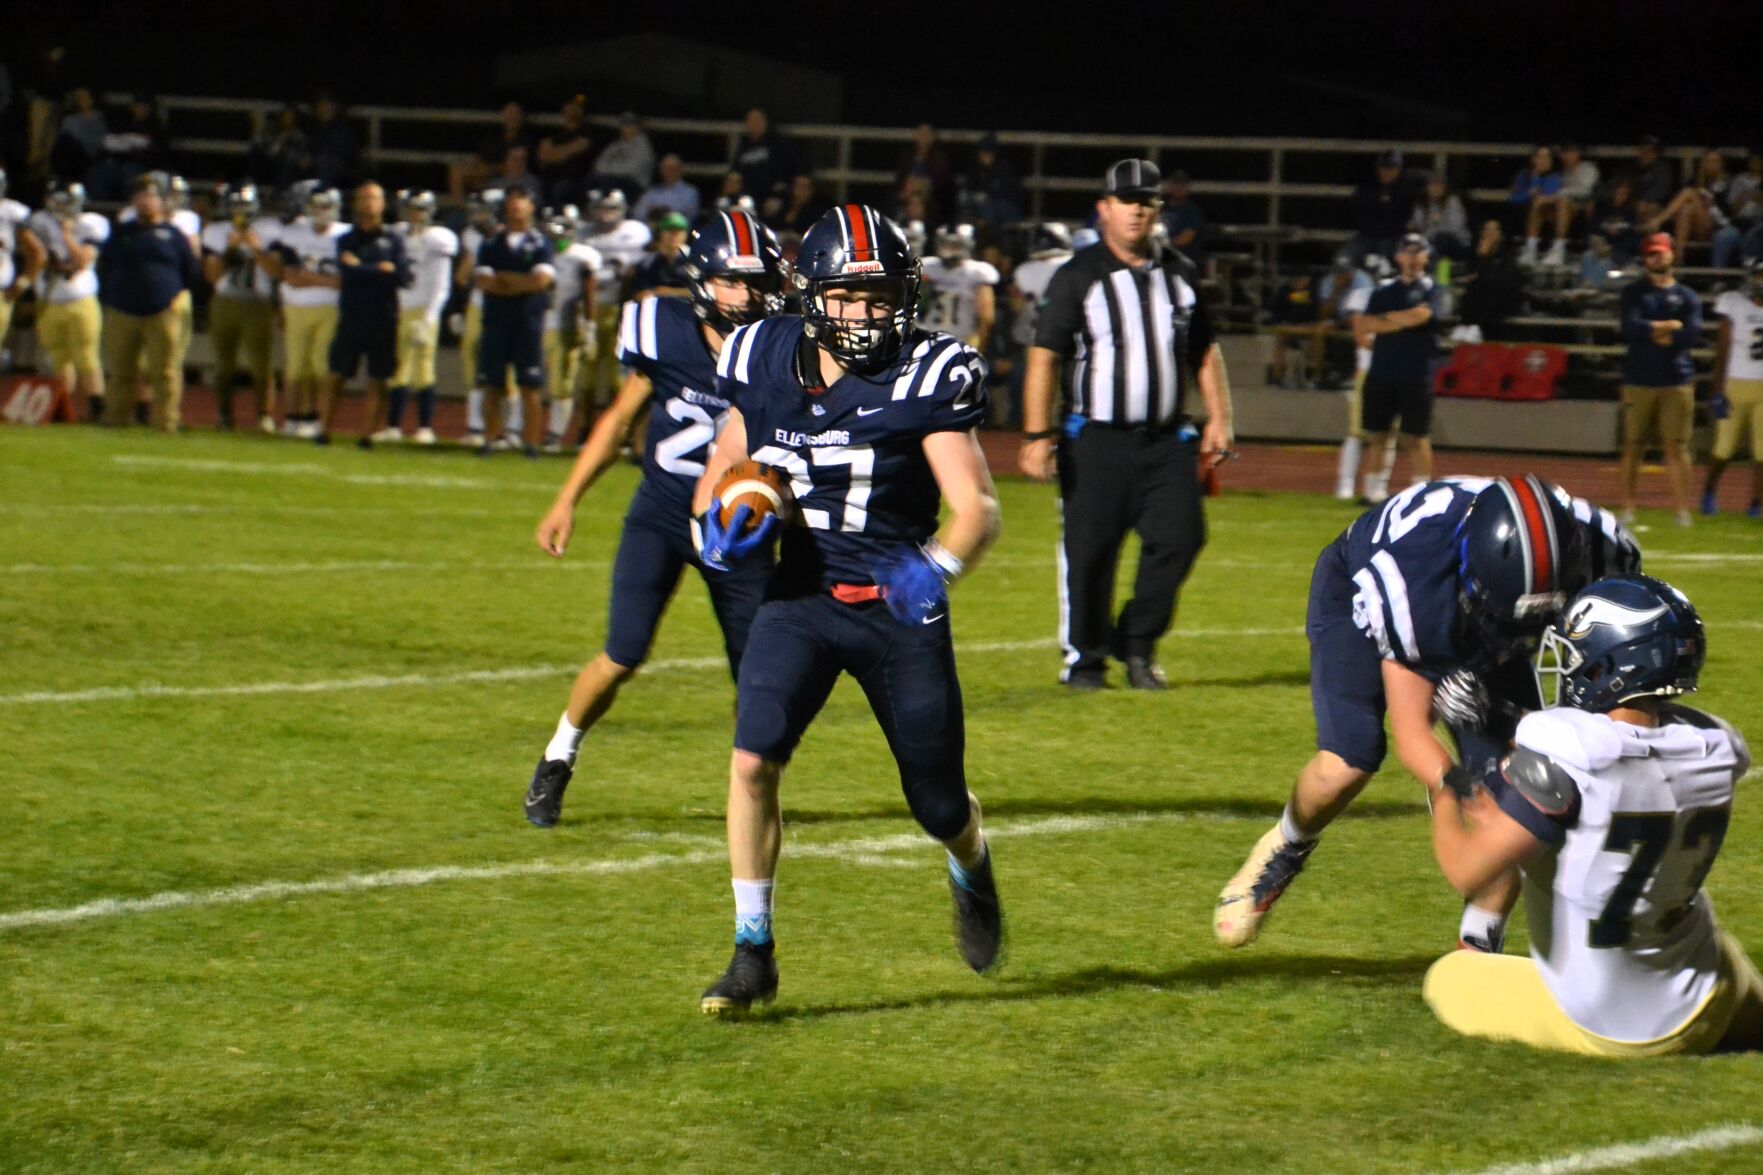 An archrival rout: Andaya’s hat trick leads Ellensburg football’s shutout of Selah